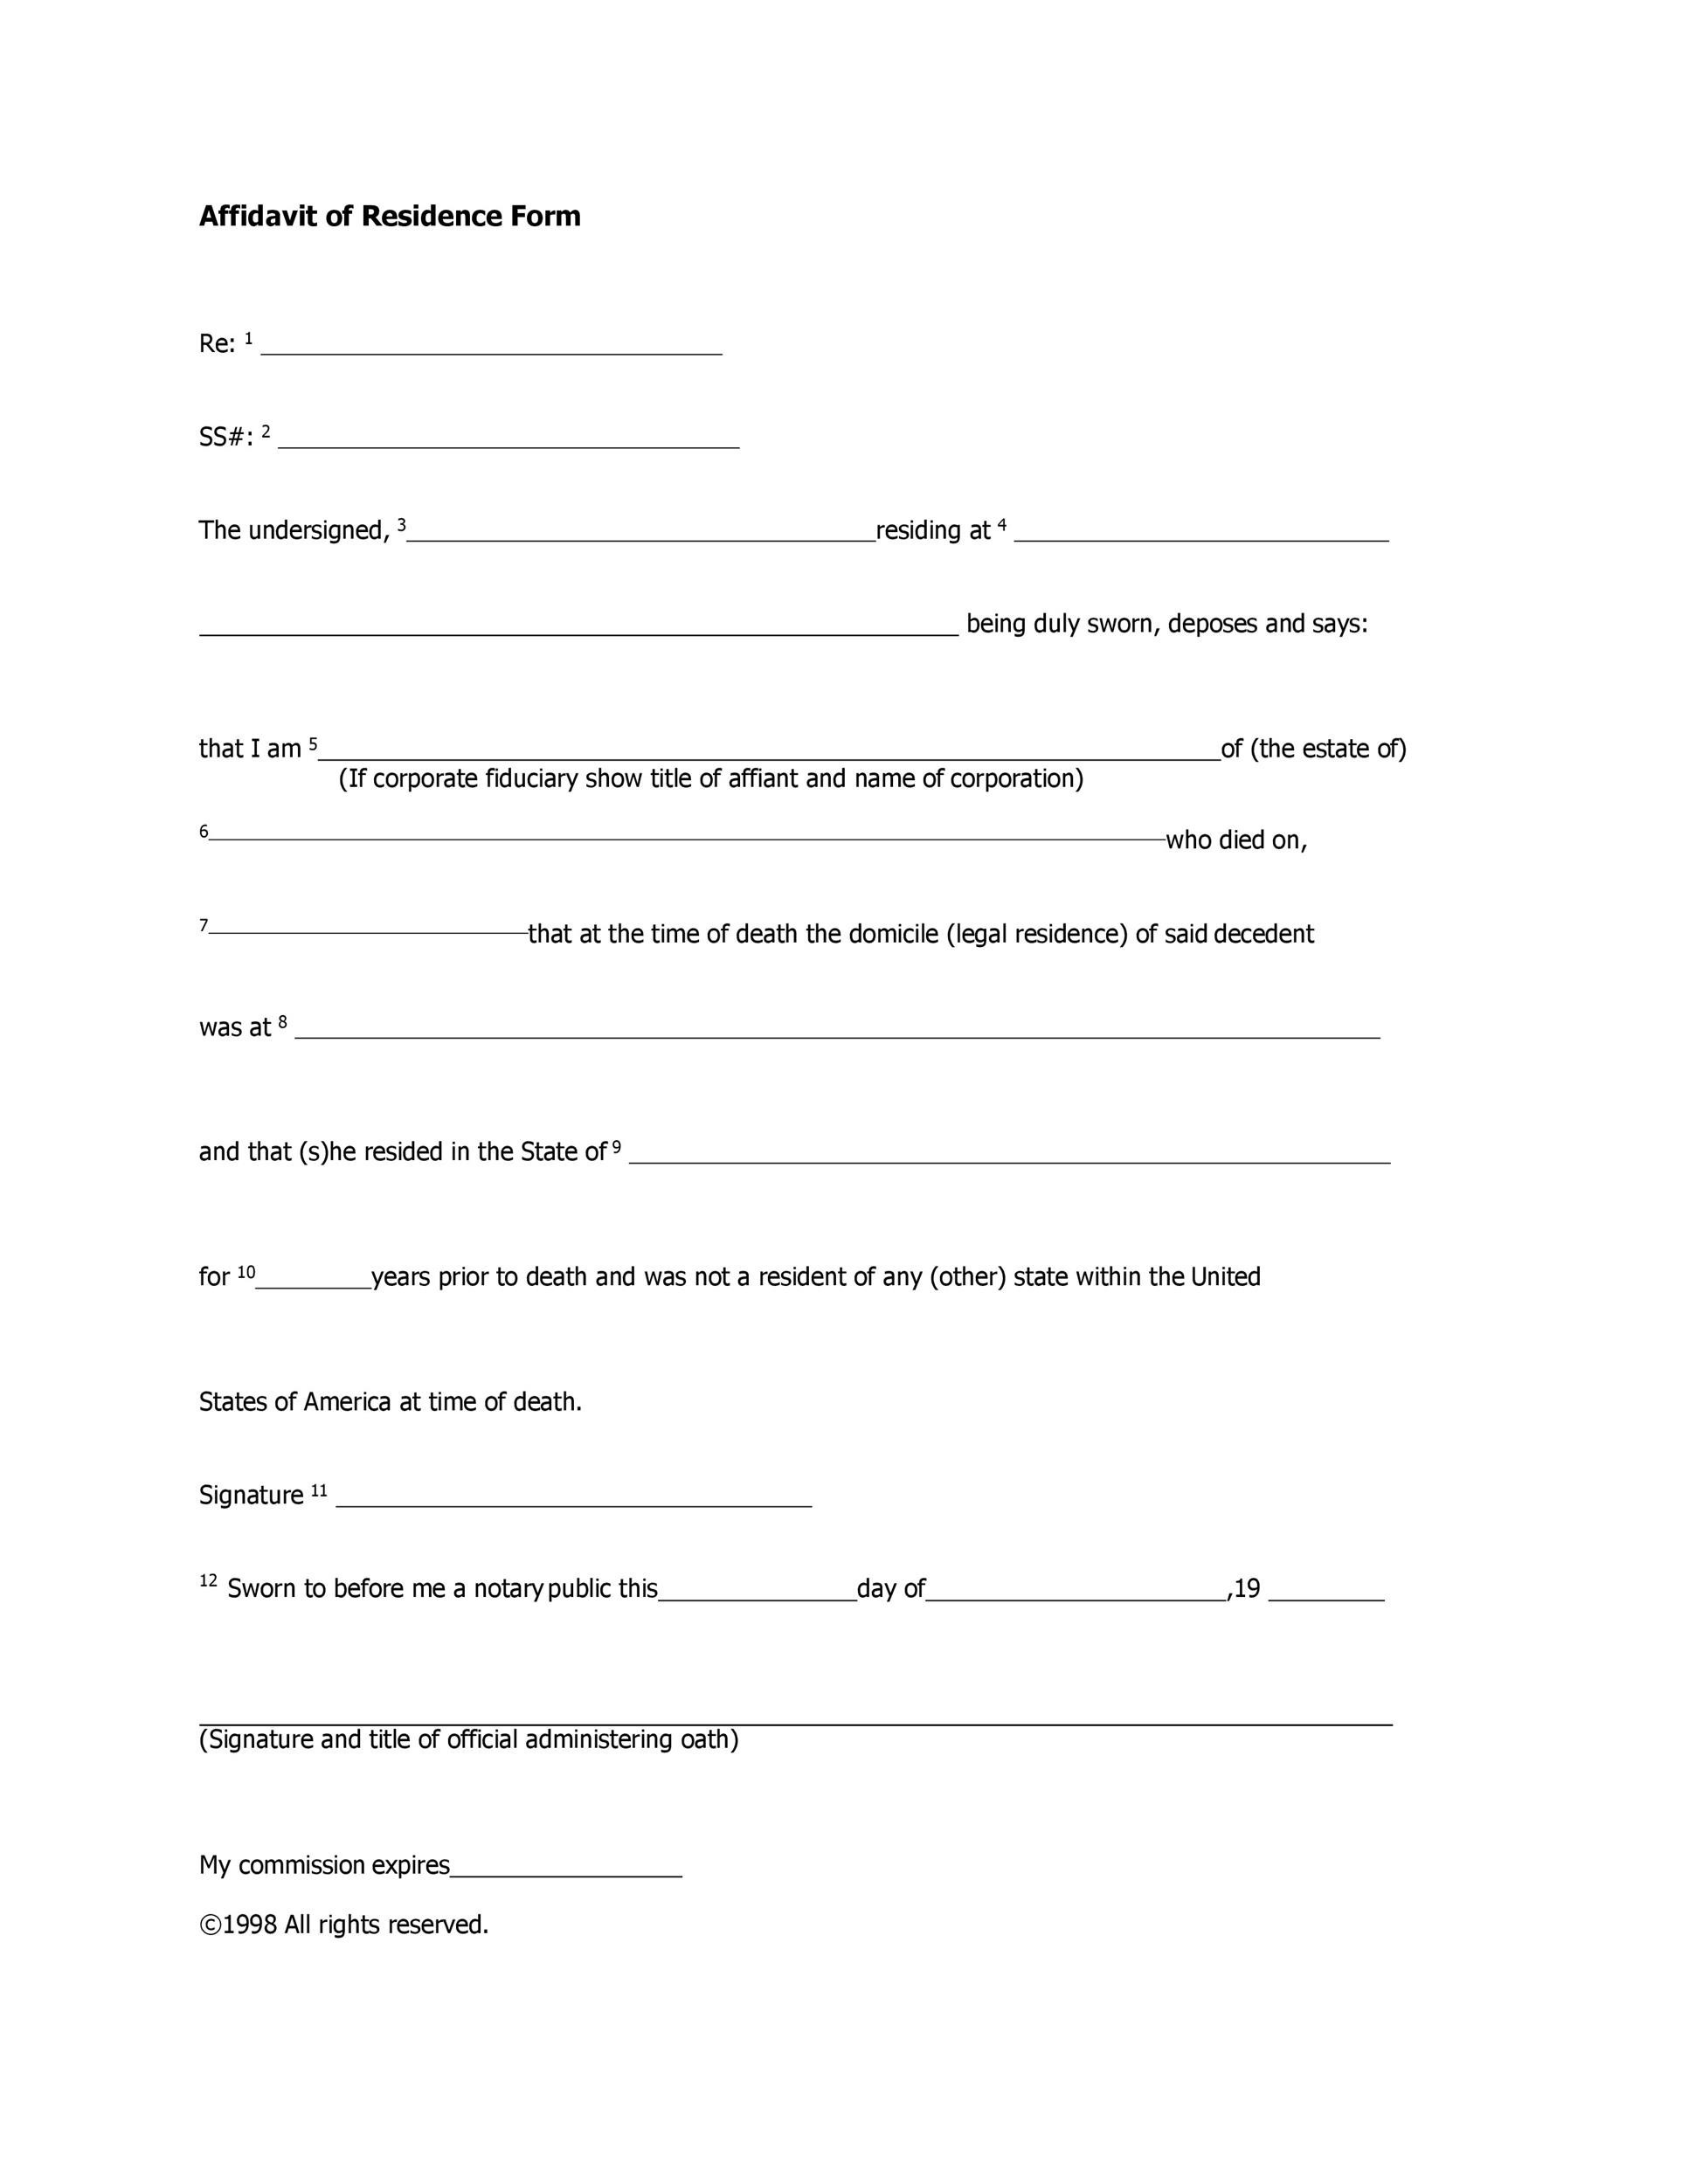 verification-of-residency-form-printable-pdf-download